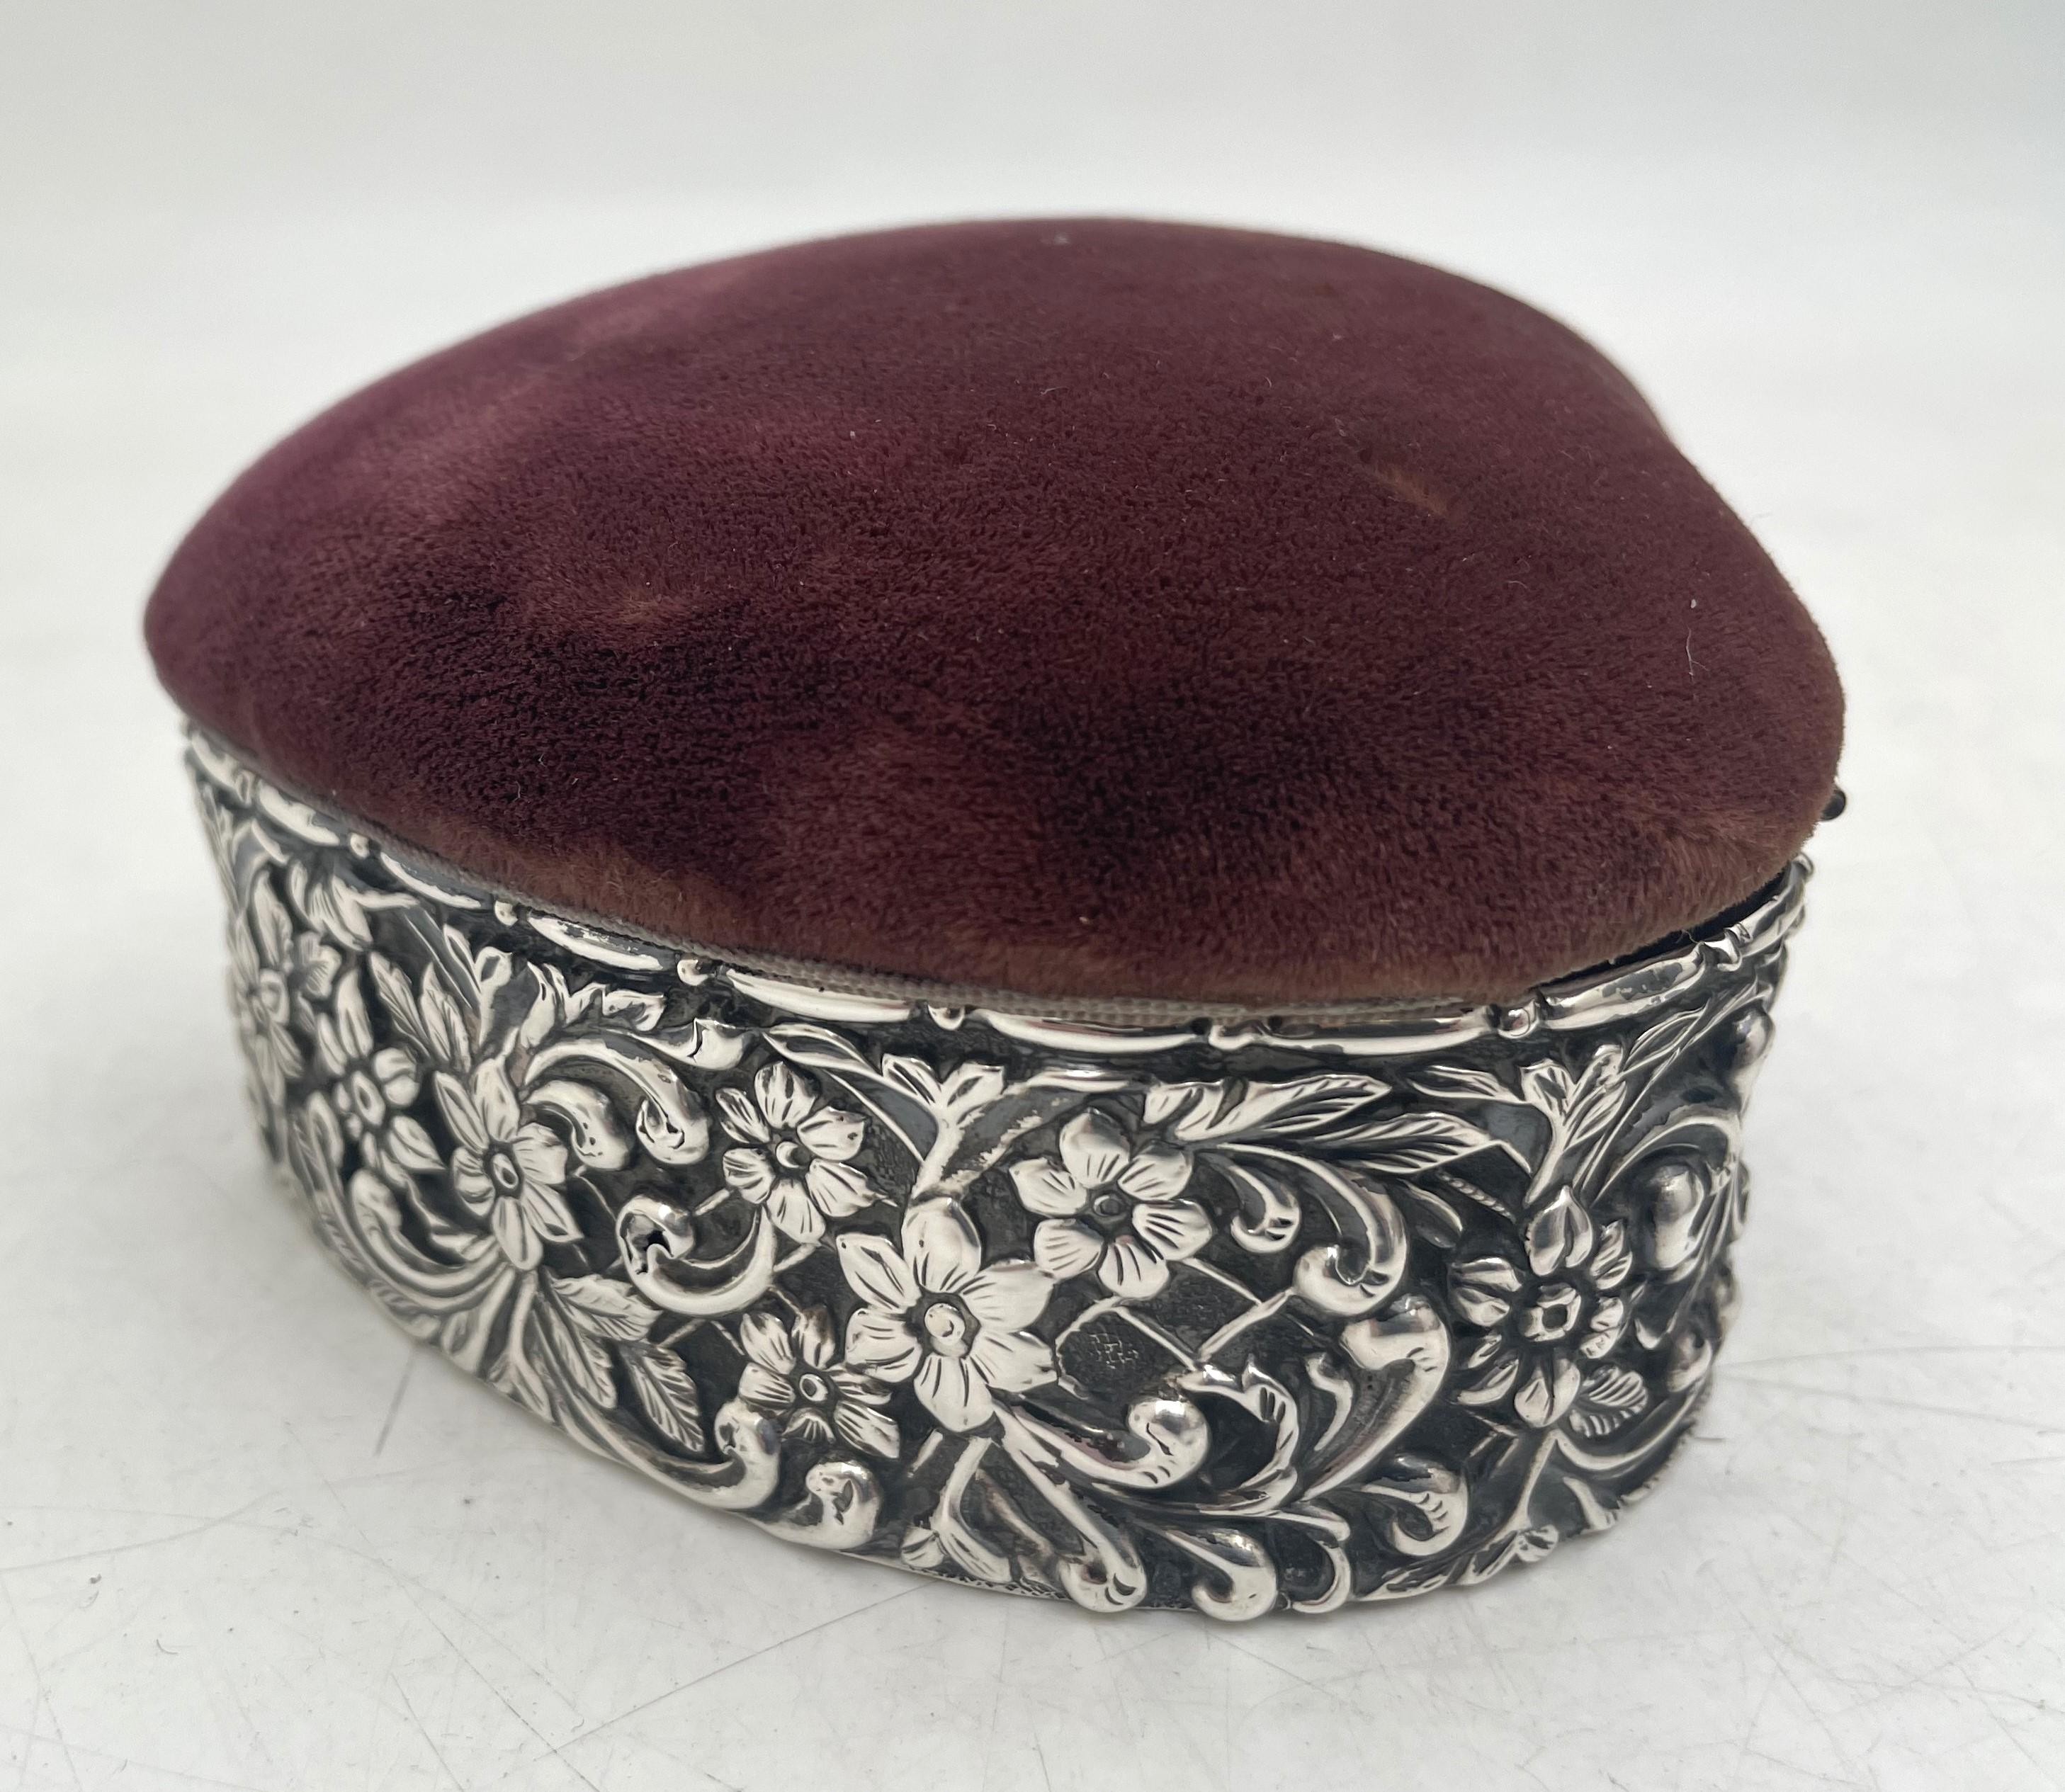 Henry Matthews, English sterling silver heart-shaped jewelry box from 1911 (Edwardian era) in repousse pattern, beautifully adorned with floral motifs. It measures 3 7/8'' by 3 5/8'' by 2 1/2'' in height, and bears hallmarks as shown.

Henry